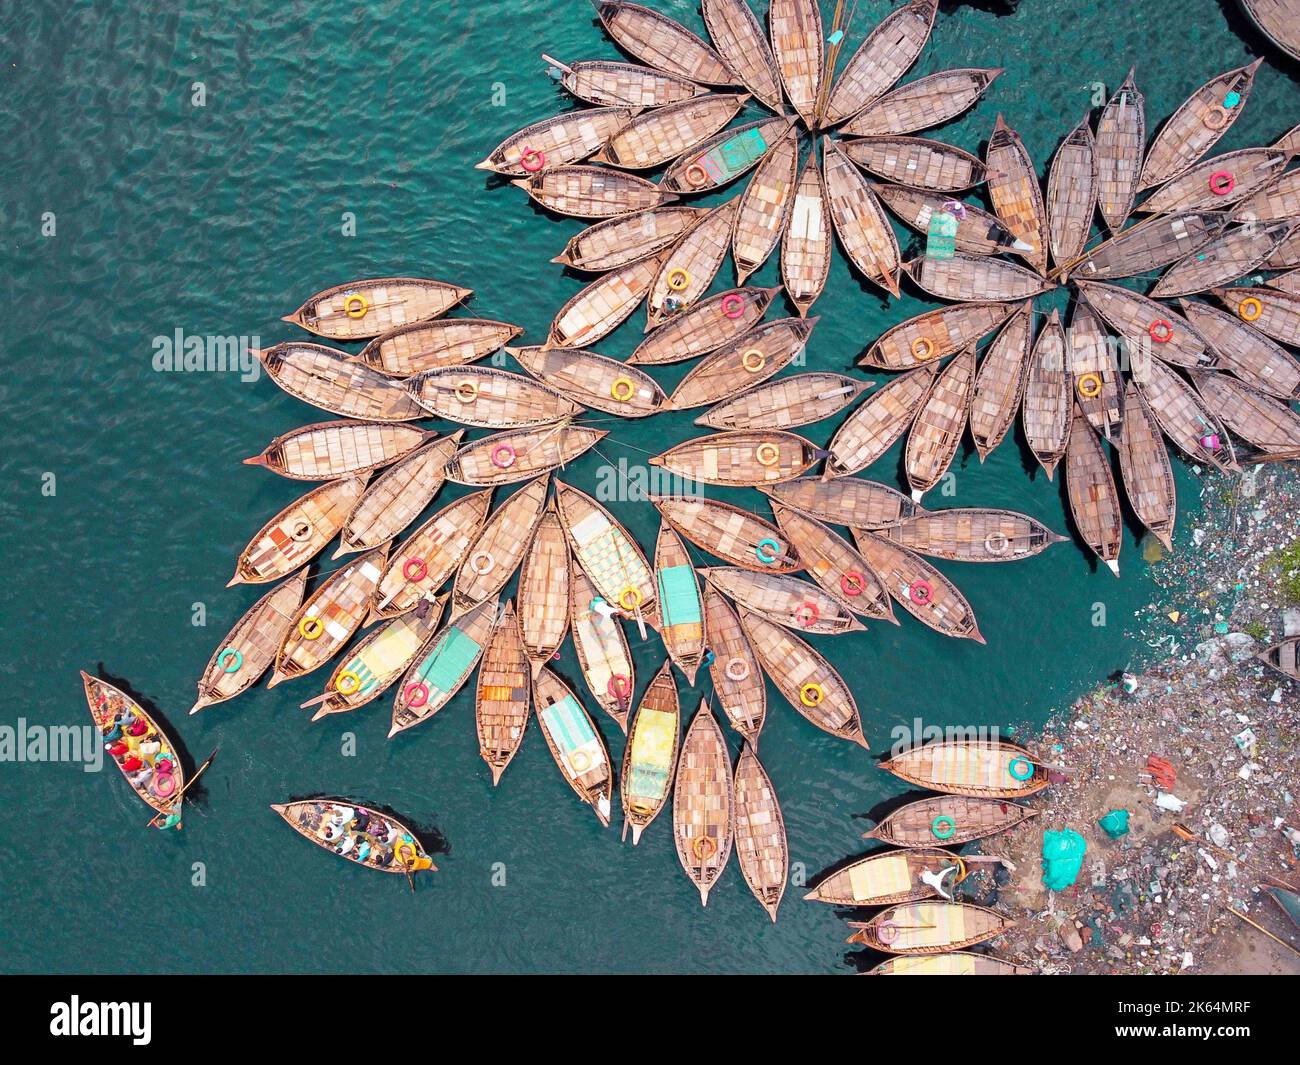 Dhaka, Dhaka, Bangladesh. 11th Oct, 2022. A fleet of wooden boats, which resemble the petals of flower, waits to ferry commuters across the Buriganga River to jobs at a major river port in Dhaka, Bangladesh while boatmen tie the boats together in a flowery pattern and get forty winks ahead of the afternoon rush hour. They work 16 hours a day and get less than Â£5 for this. So, they take rest whenever they get a chance to relieve the fatigue of the long working hours. During that time, most of the boats are tied up together except a few ones and the number of passengers is lower compared to t Stock Photo